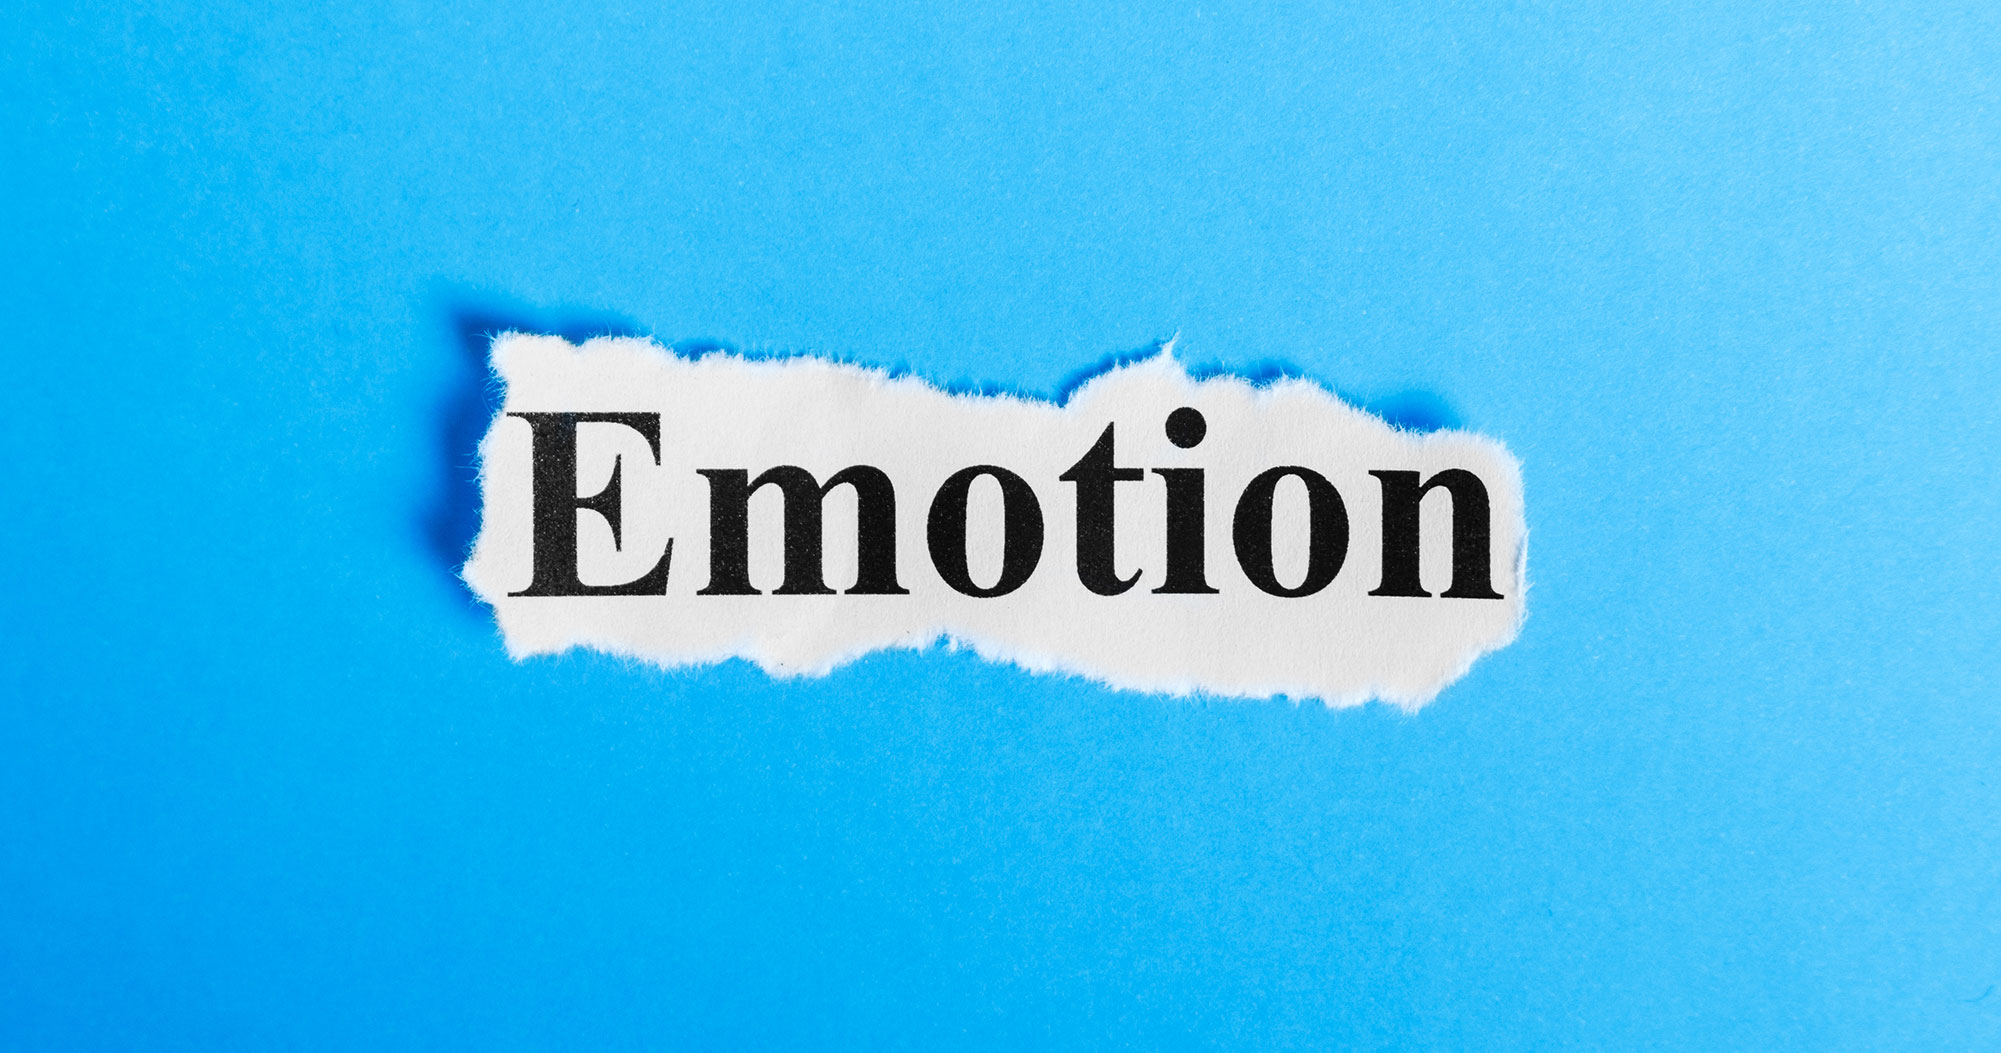 What is Emotional Branding?